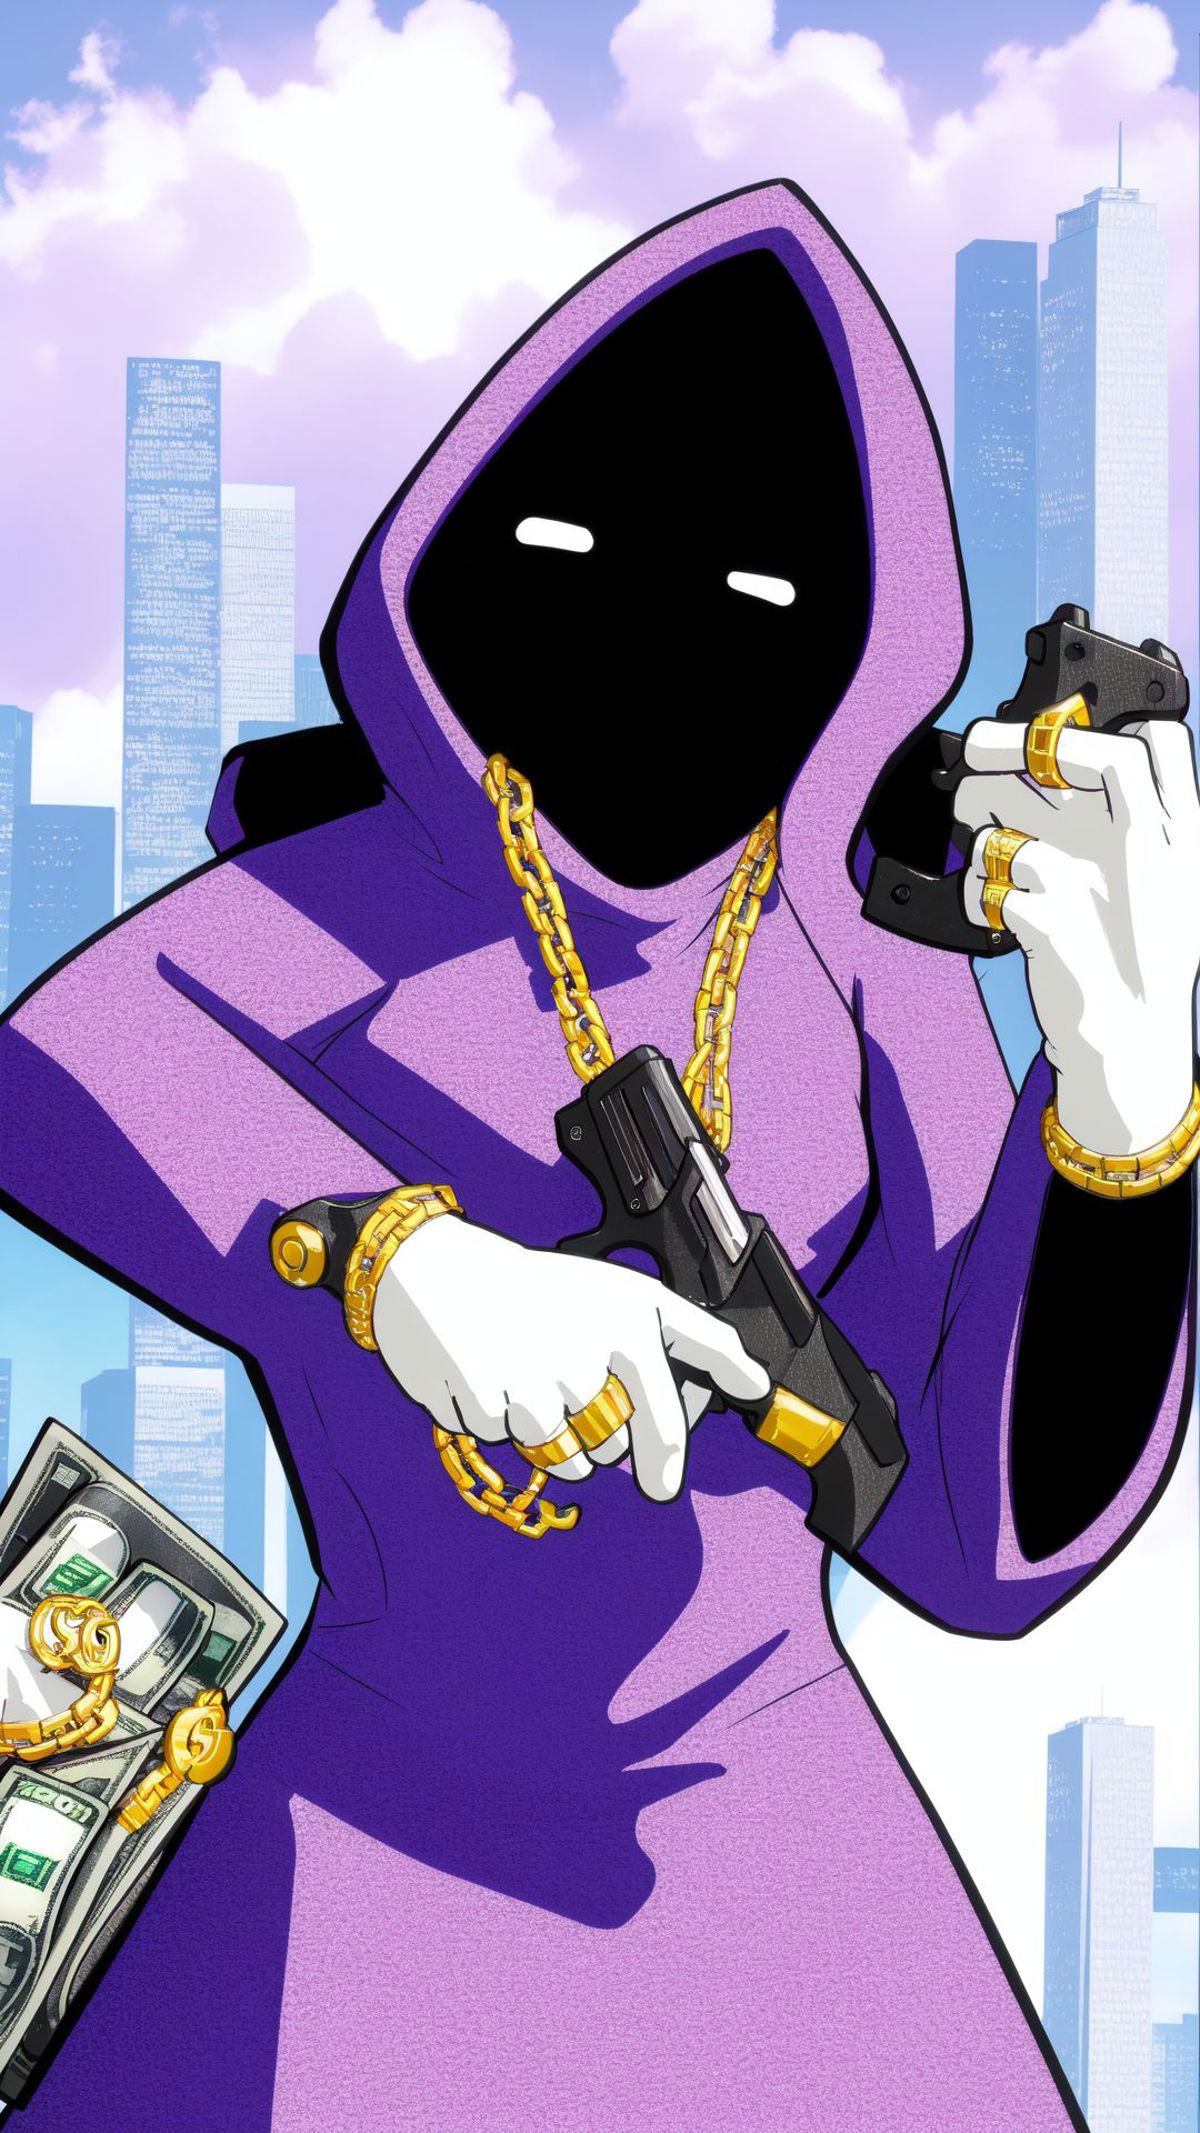 Shadow Wizard Money Gang image by marusame